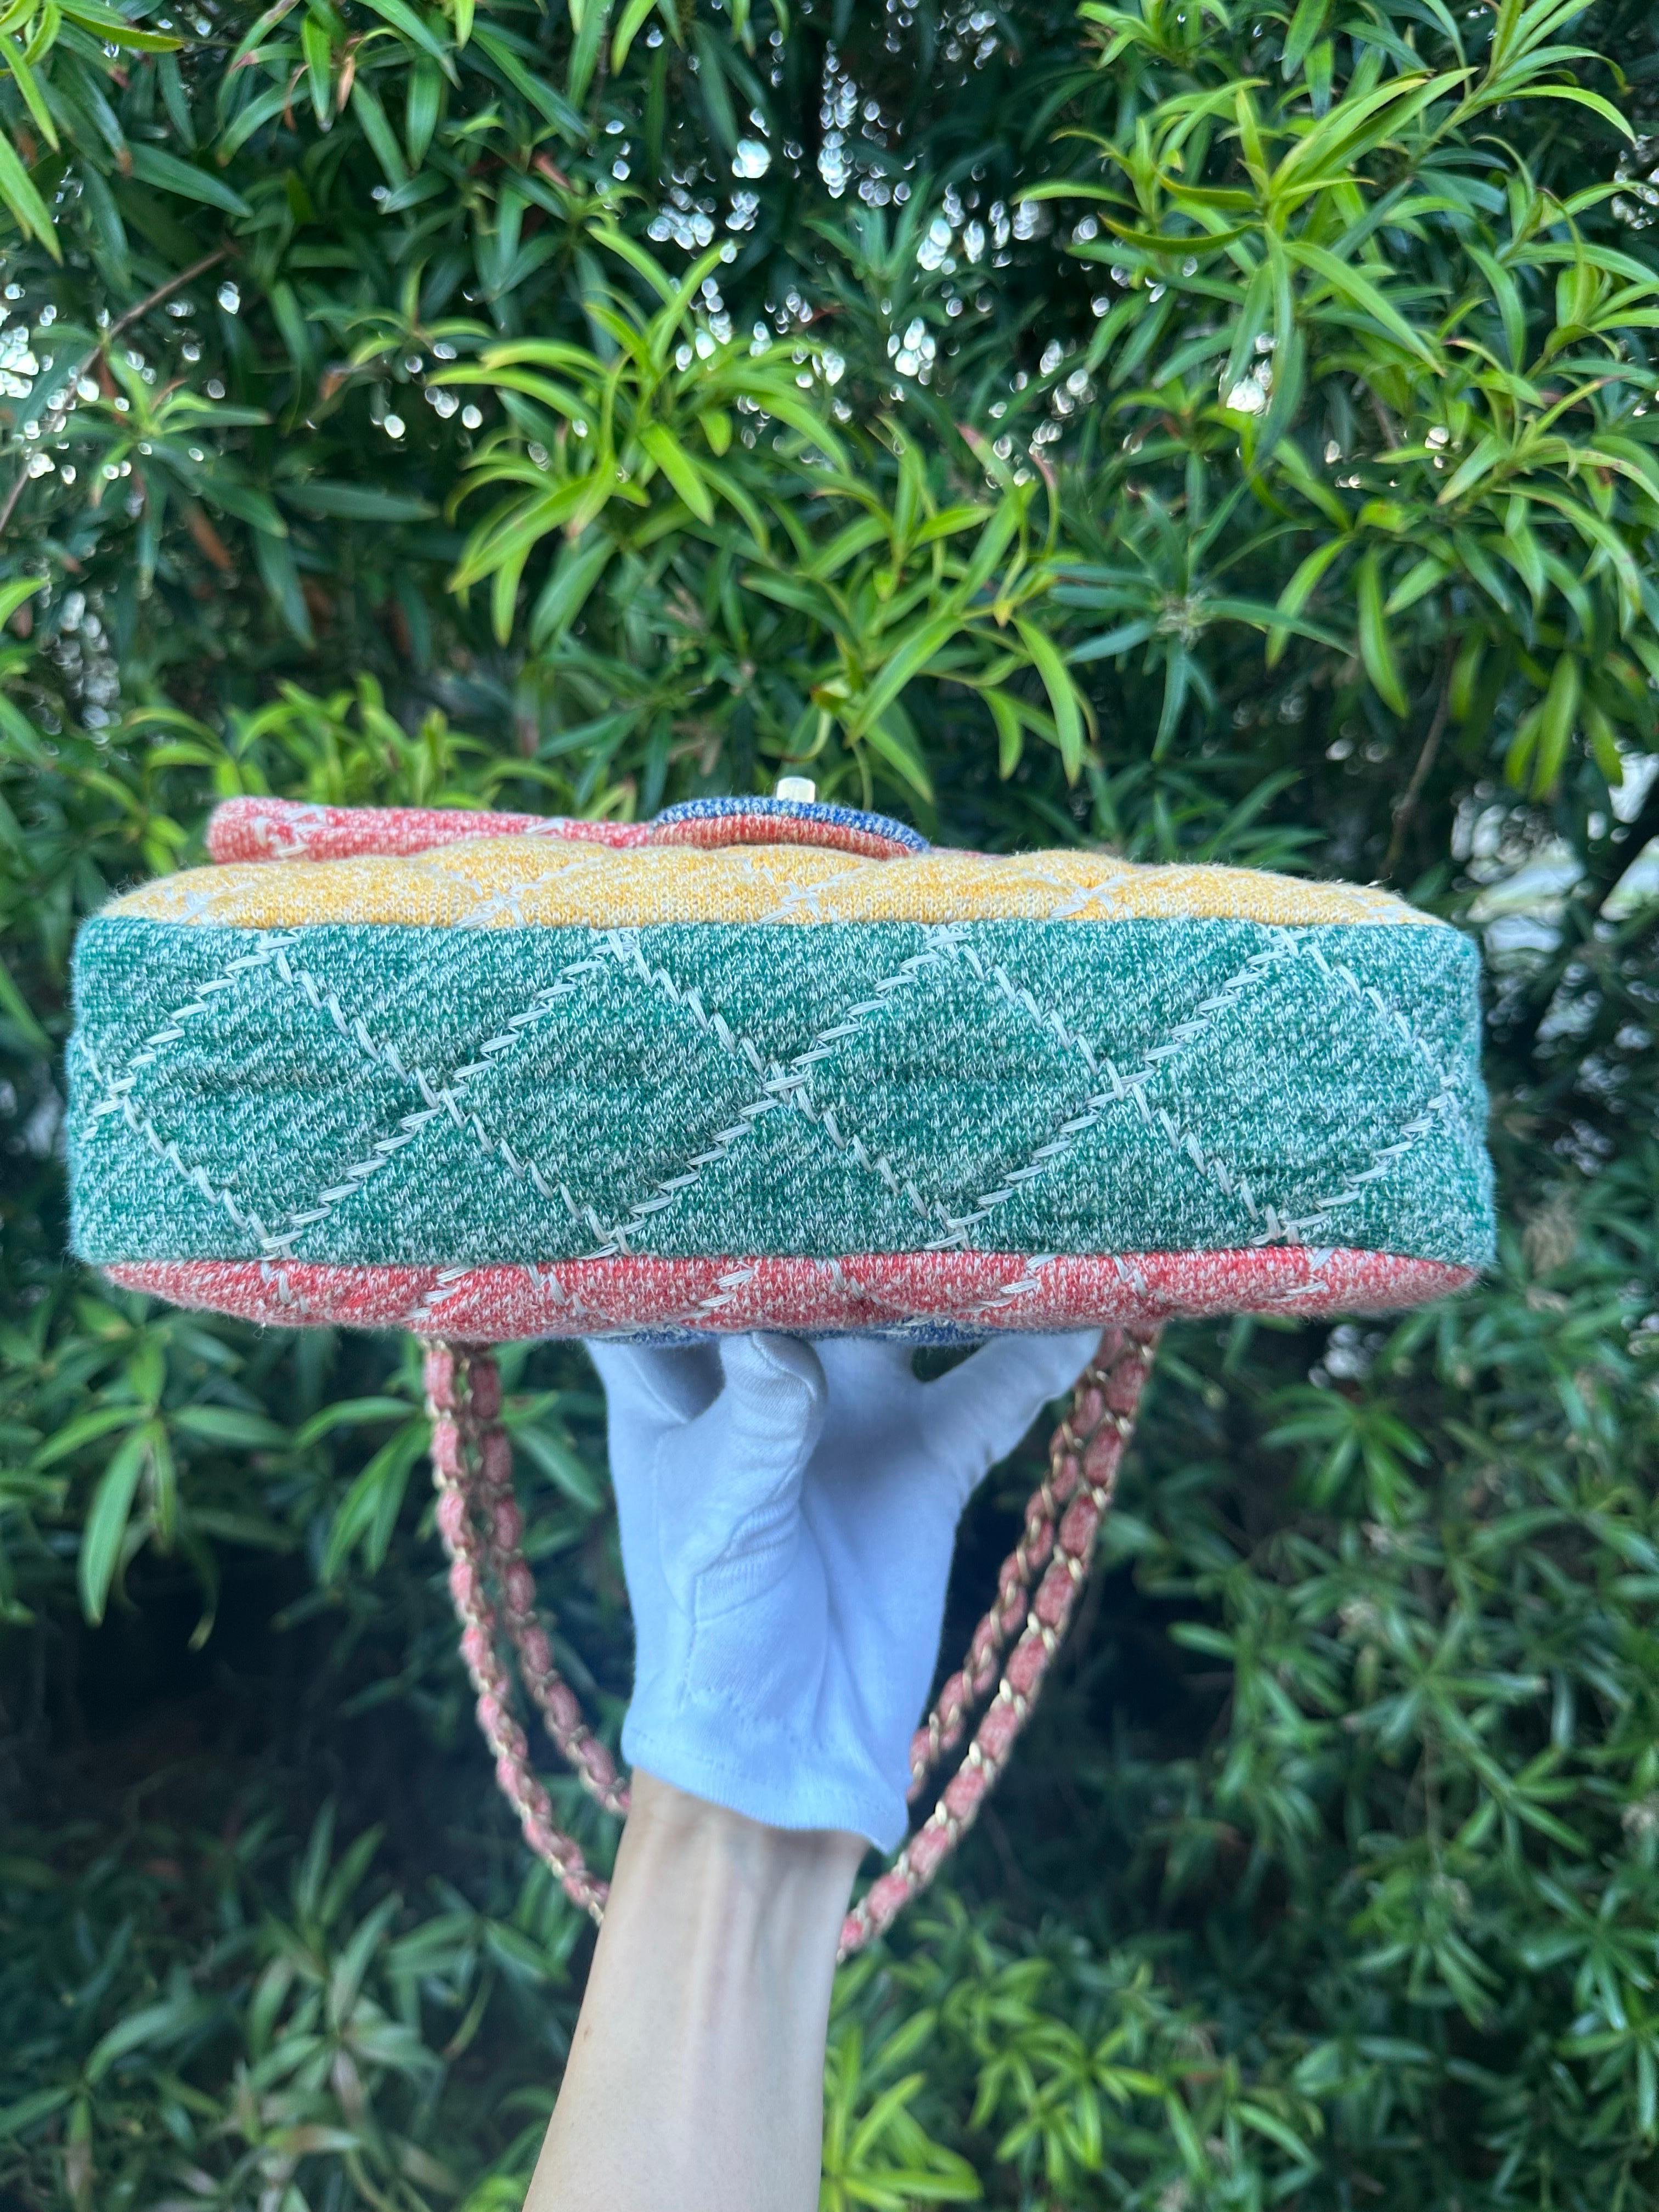 CHANEL Jersey Quilted Fabrics & Co Medium Flap. Greart for everyday use!

The bag is crafted of diamond quilted jersey knit fabric in pink and yellow, green on the sides and a blue rear patch pocket. There are light gold chain link shoulder straps